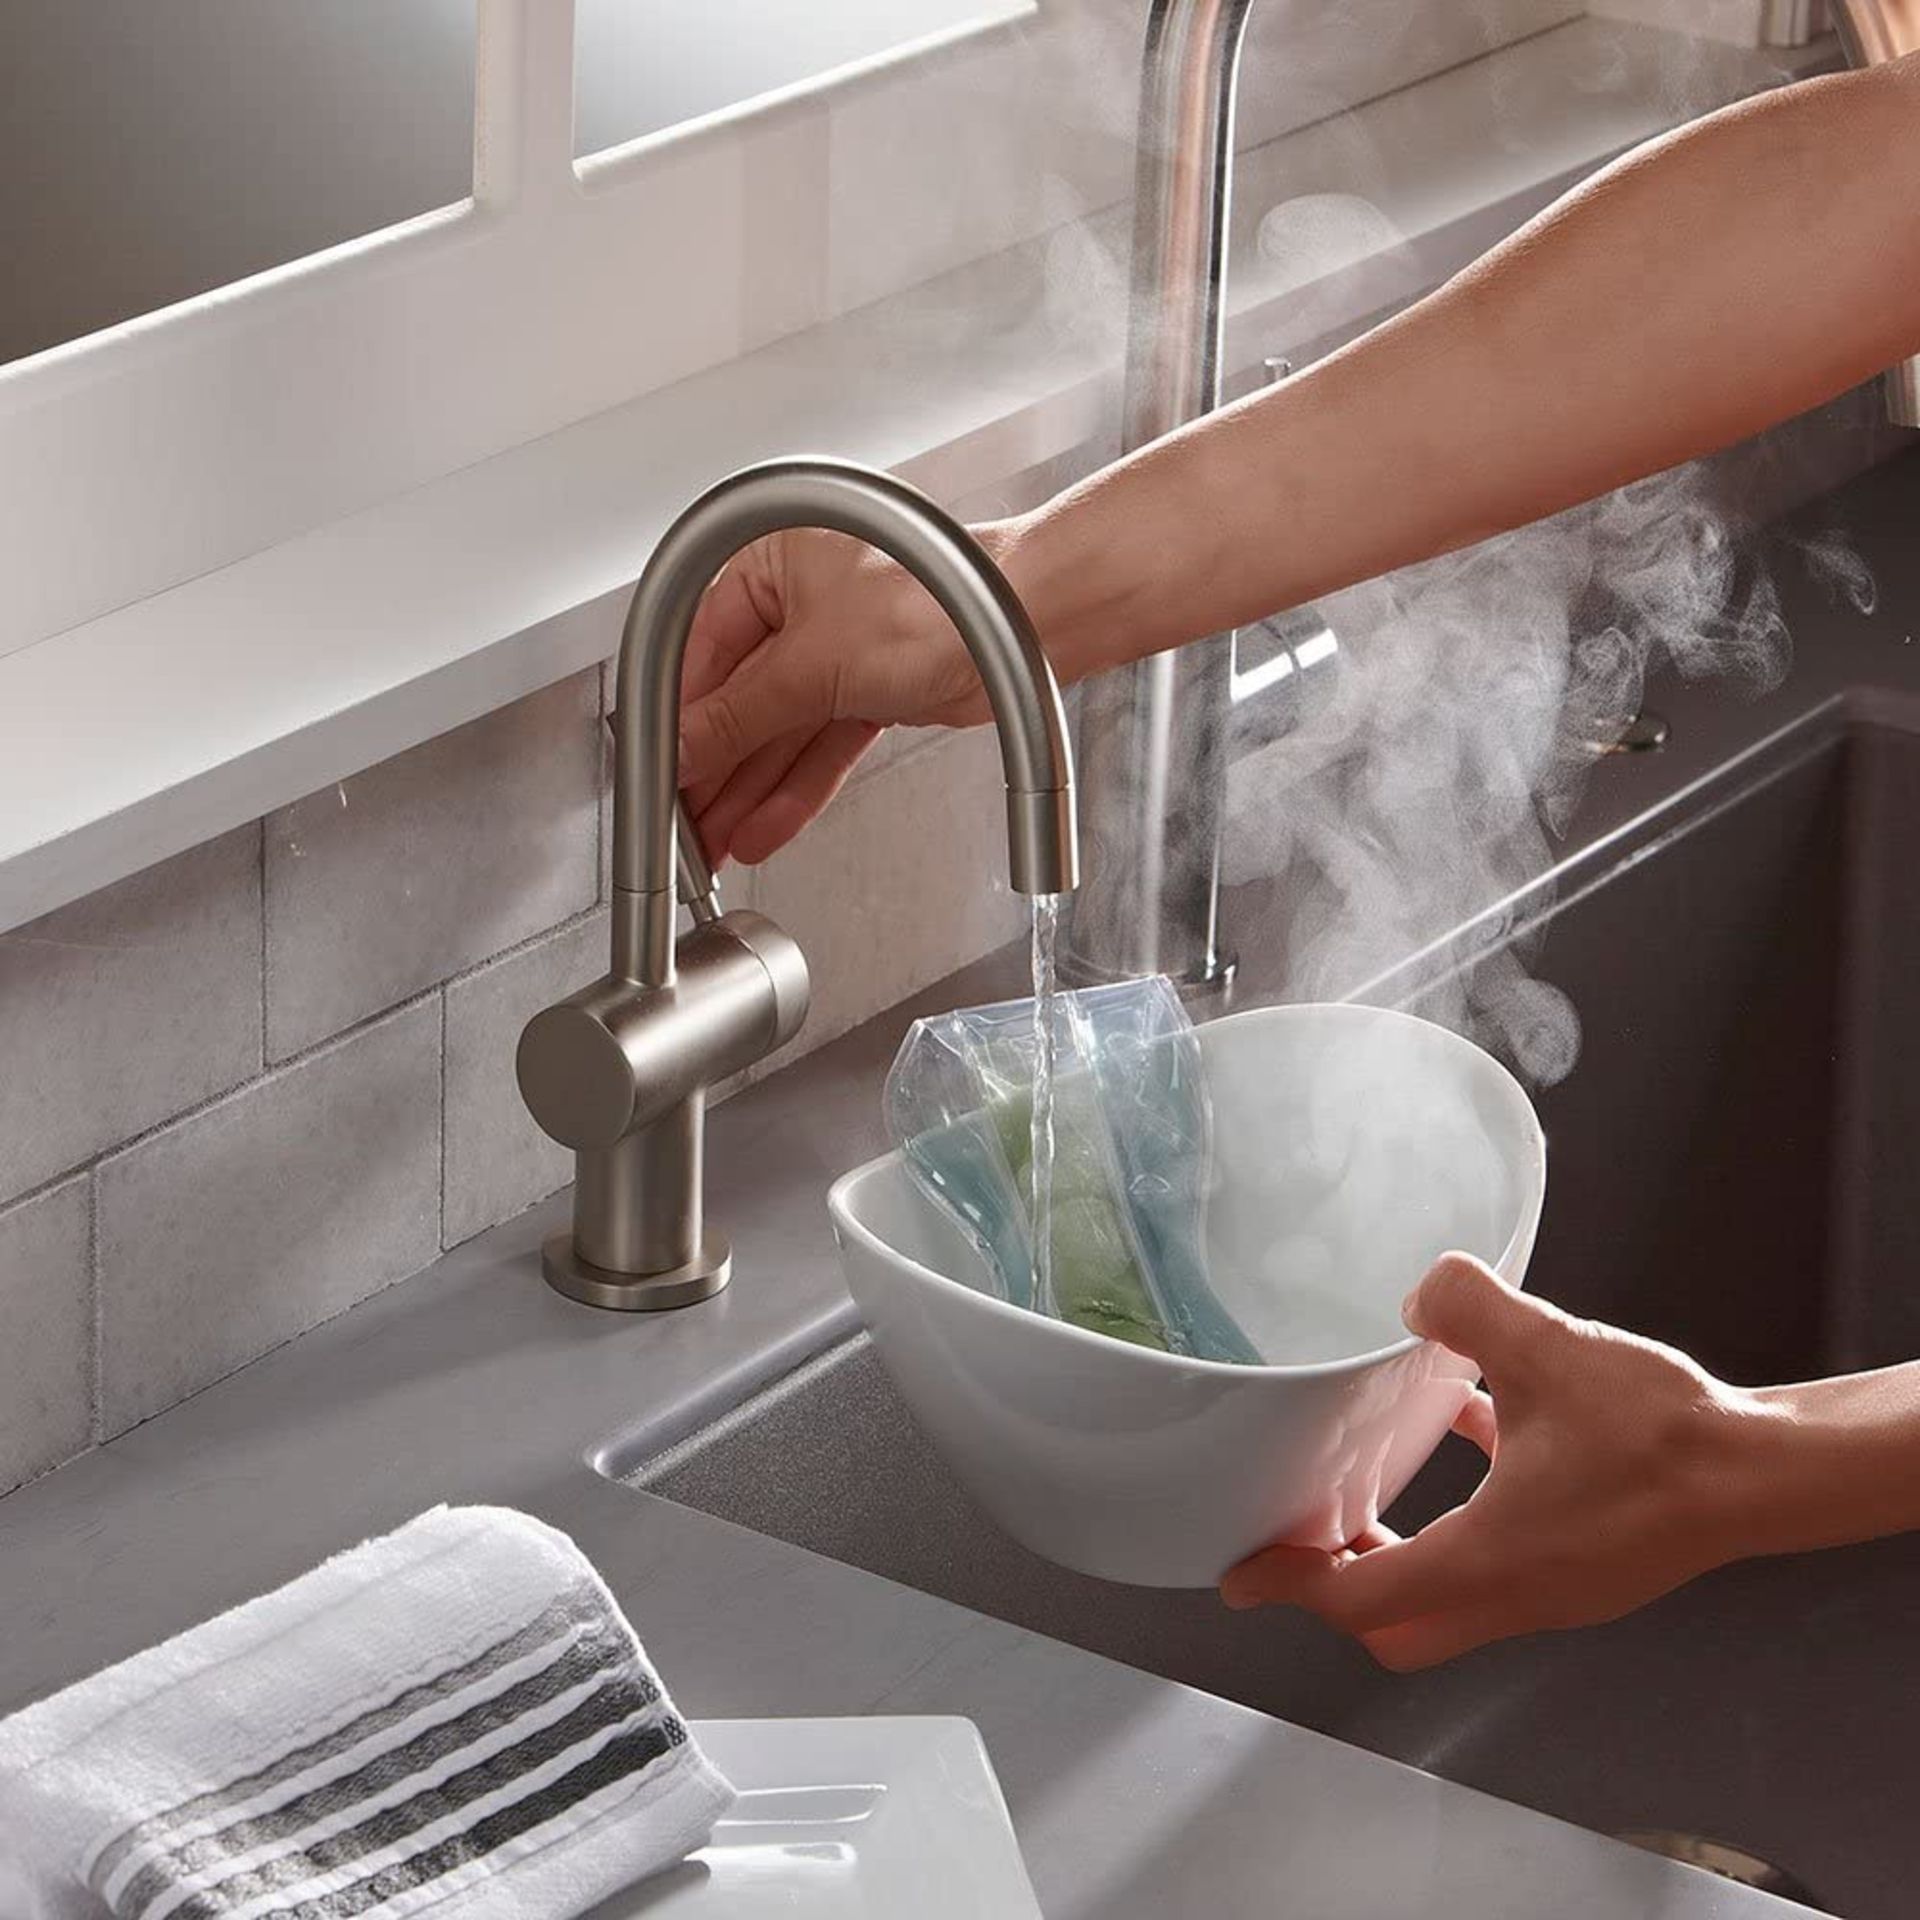 NEW (CC9) InSinkErator Modern Instant Hot Water Dispenser - Faucet Only, Satin Nickel, F-H3300S... - Image 3 of 4